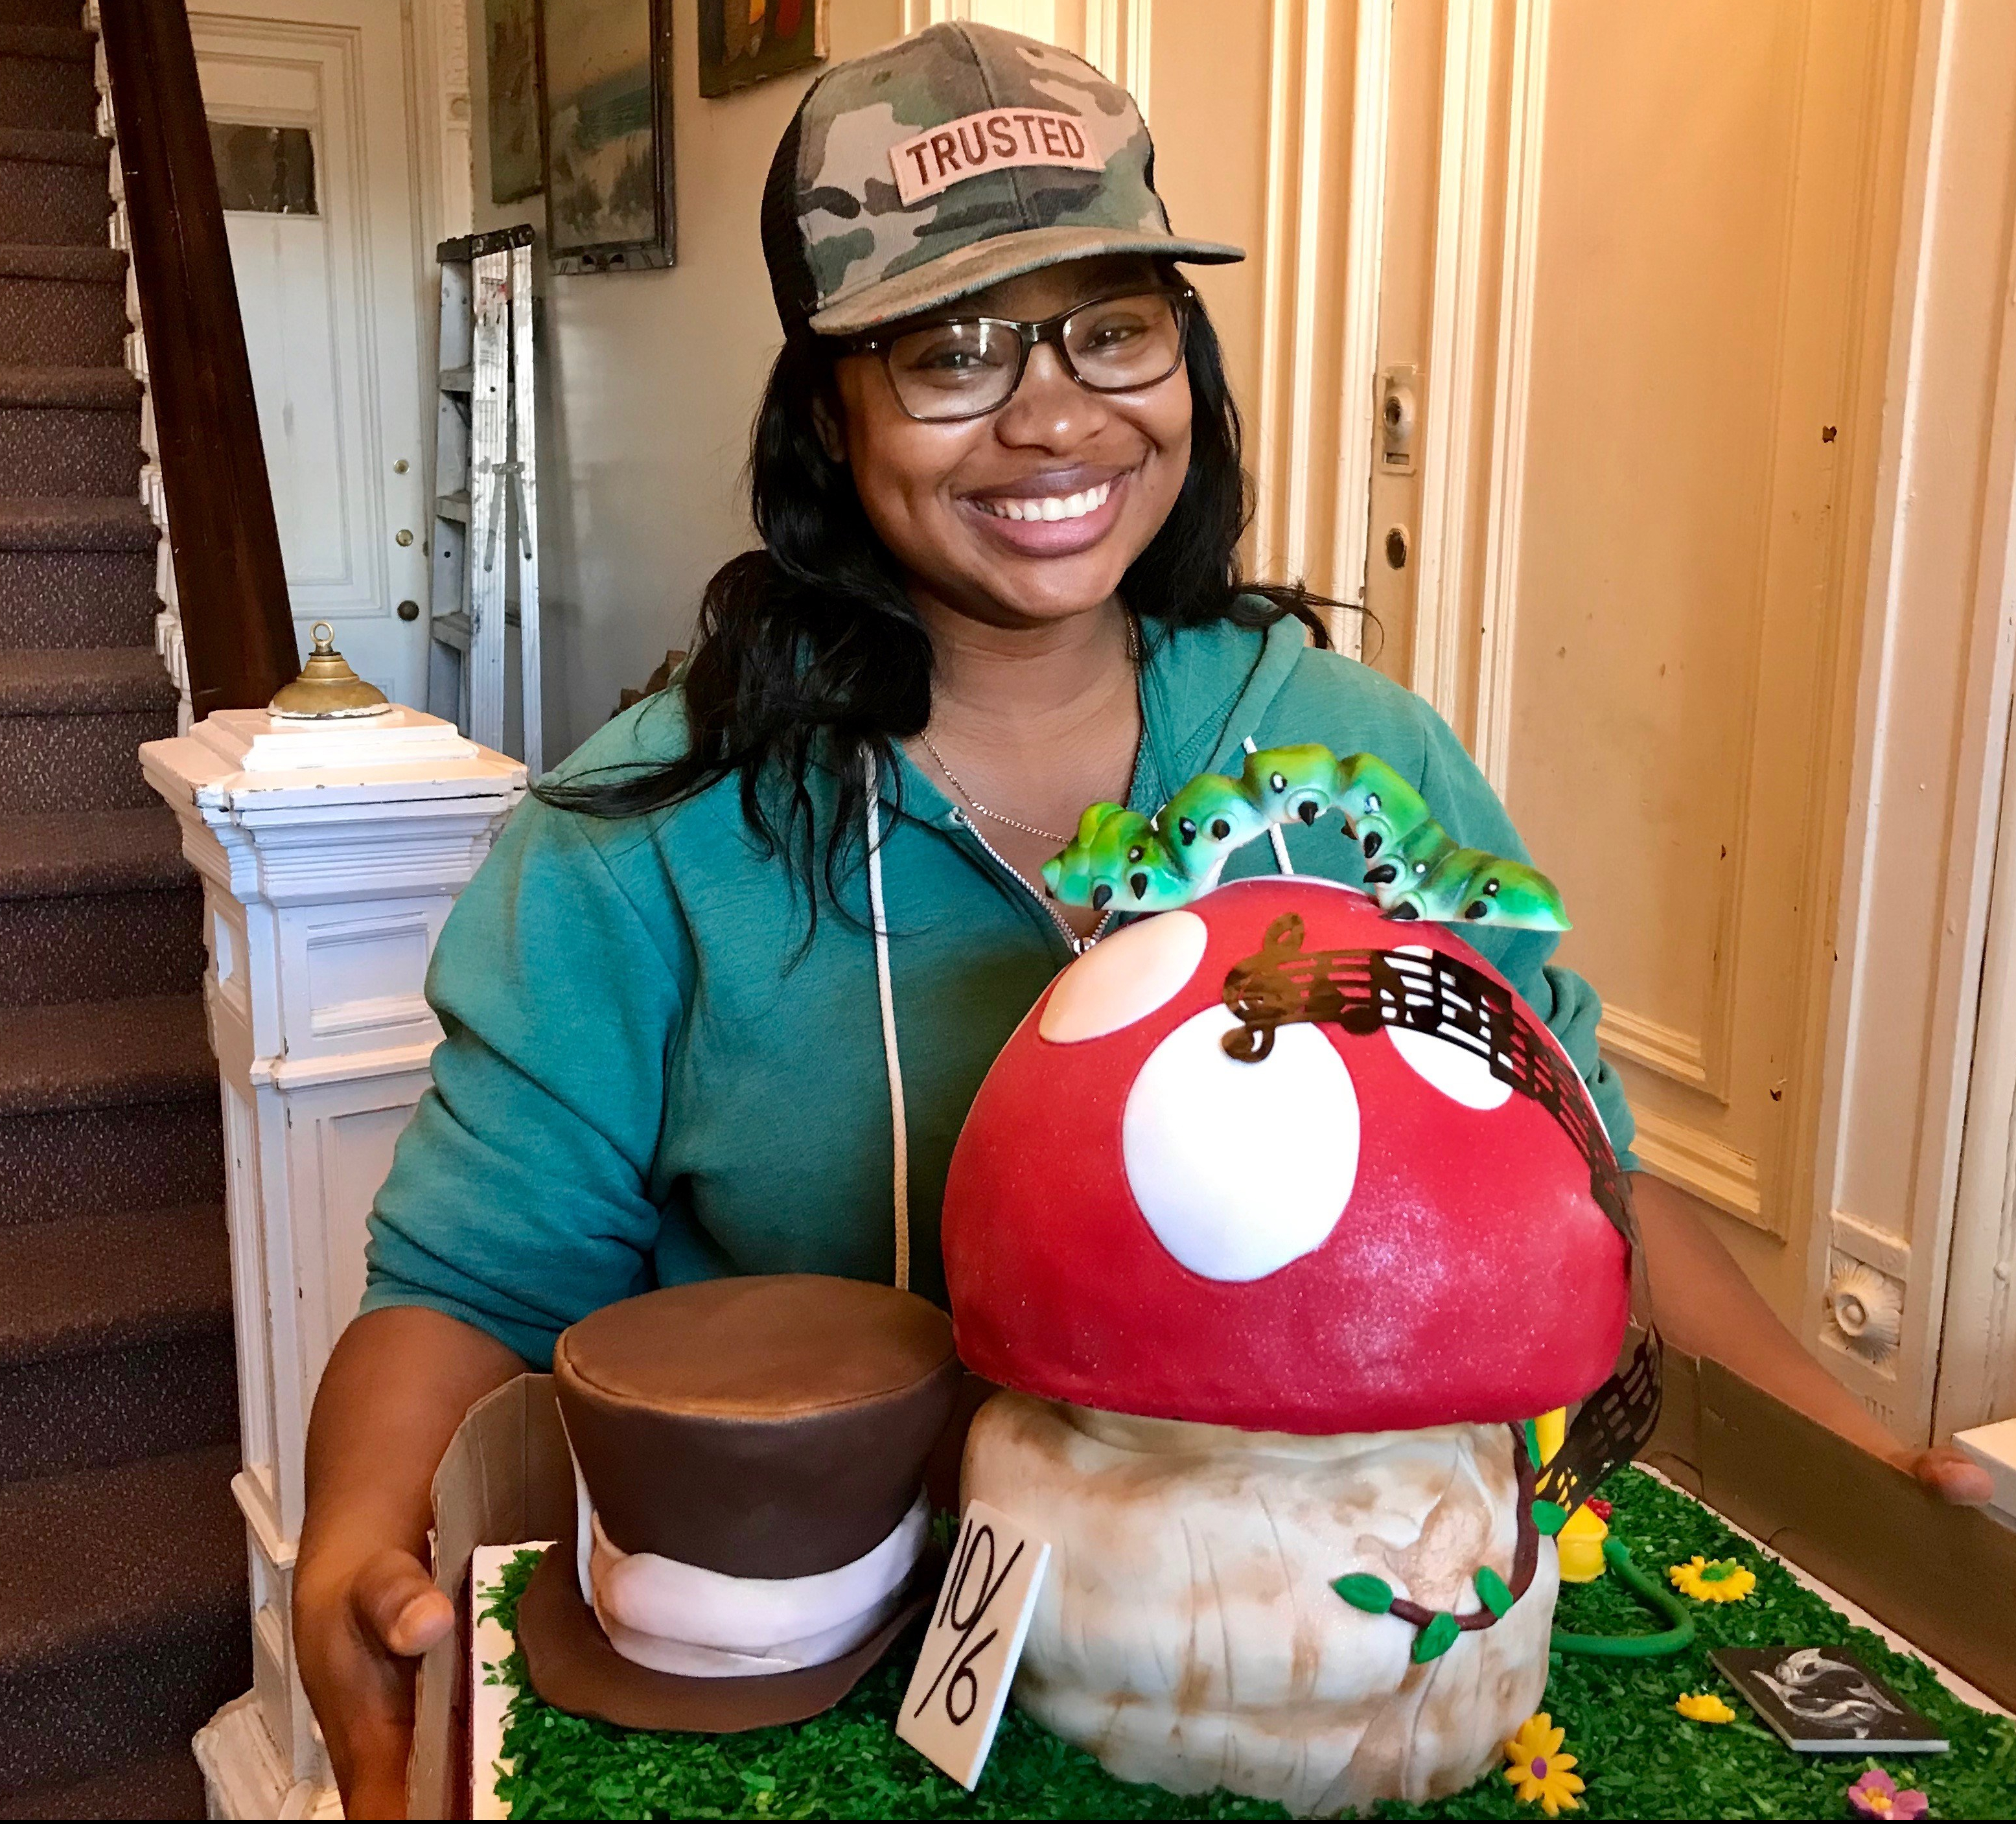 Stacy with Alice in Wonderland birthday cake 2019